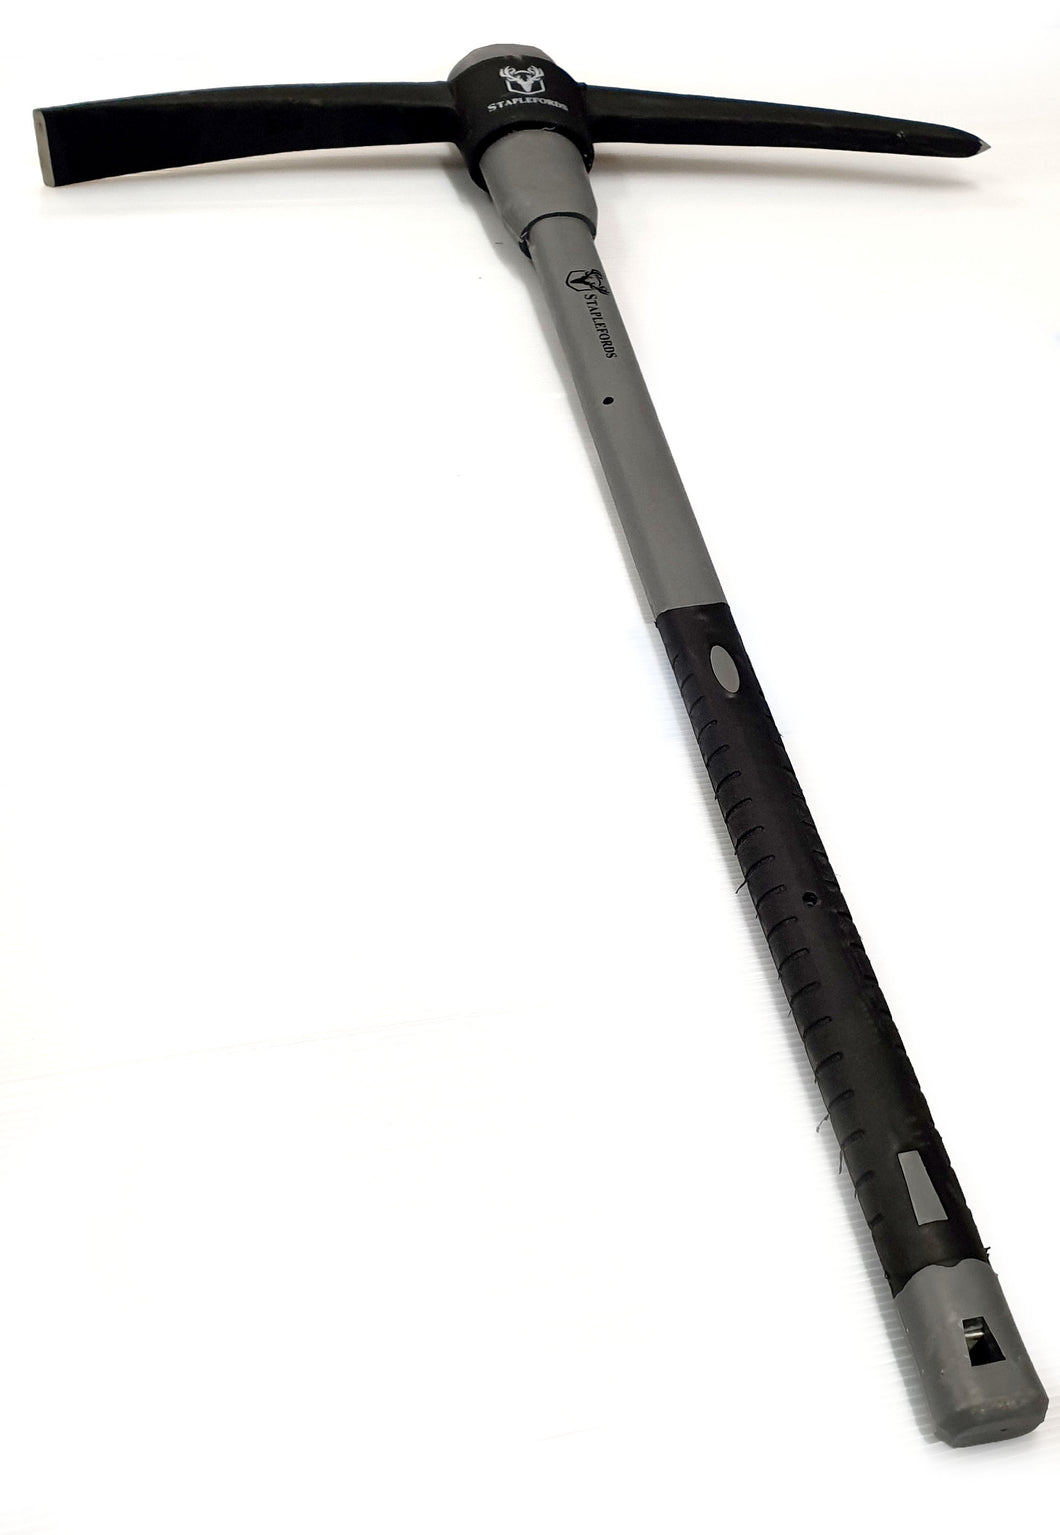 Staplefords Reinforced Steel Pick Axe with Shock Absorbing Fibreglass Handle - 900mm length